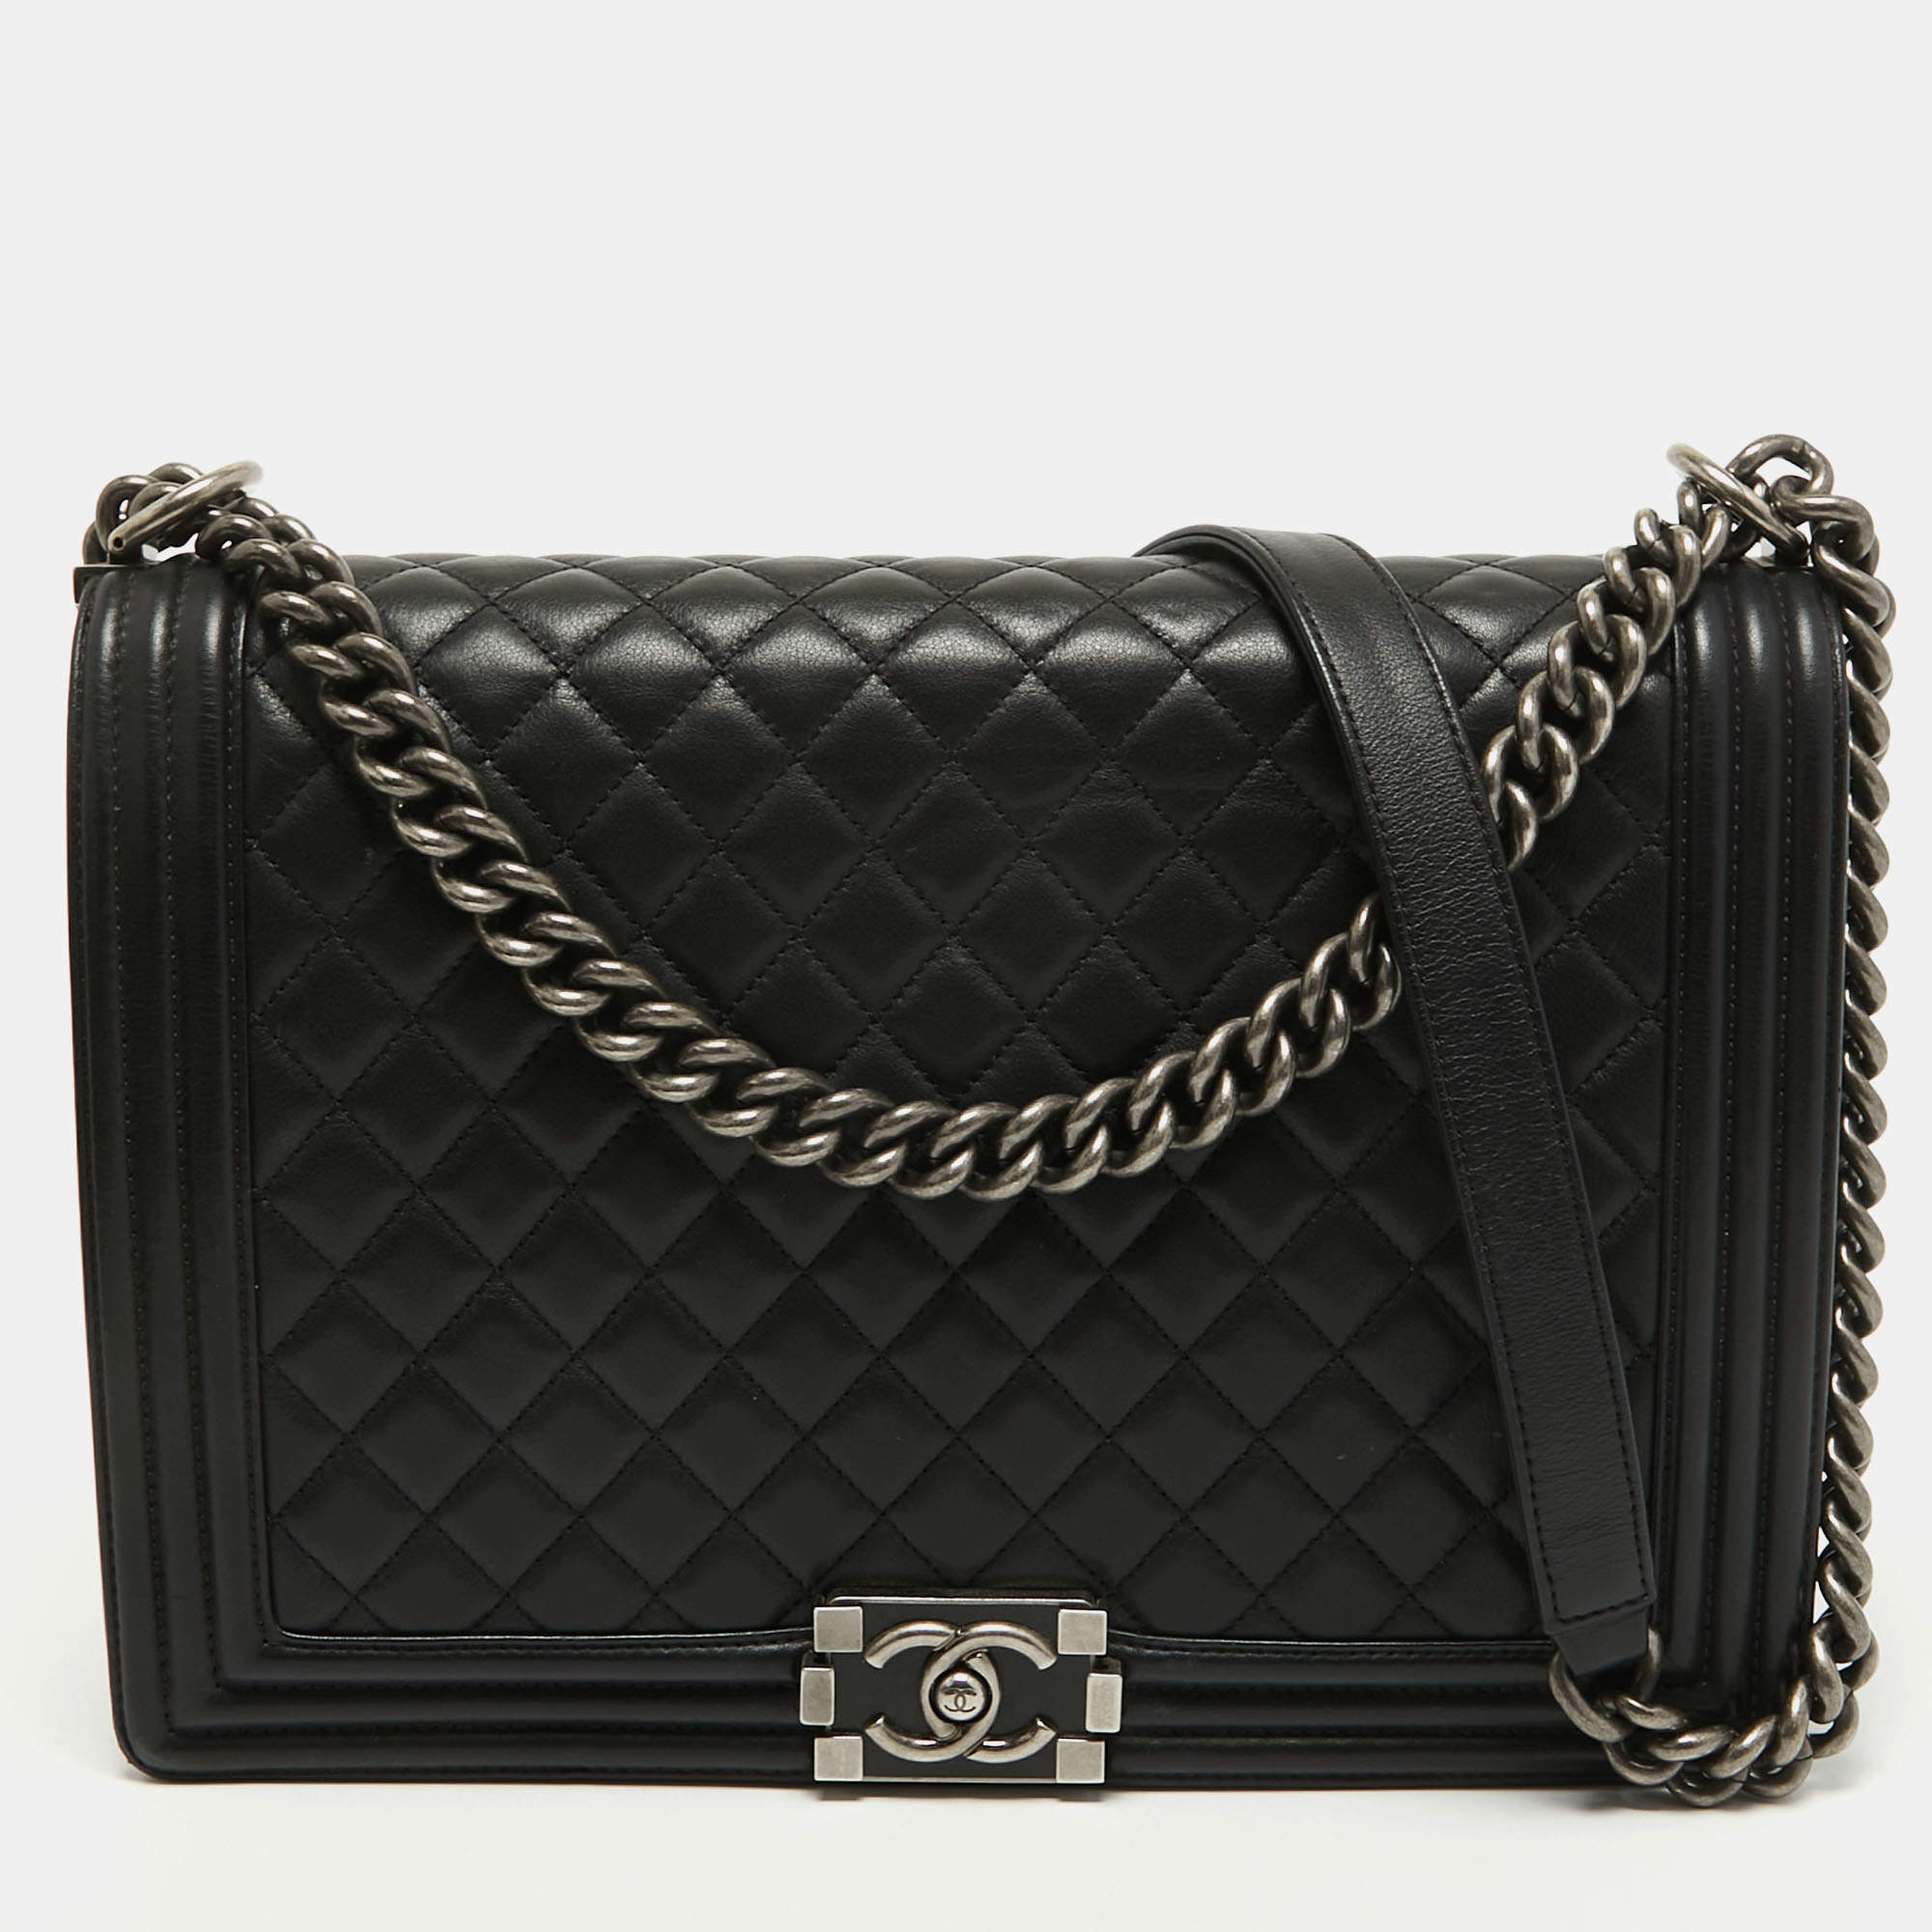 Chanel Black Quilted Leather Large Boy Flap Bag Chanel